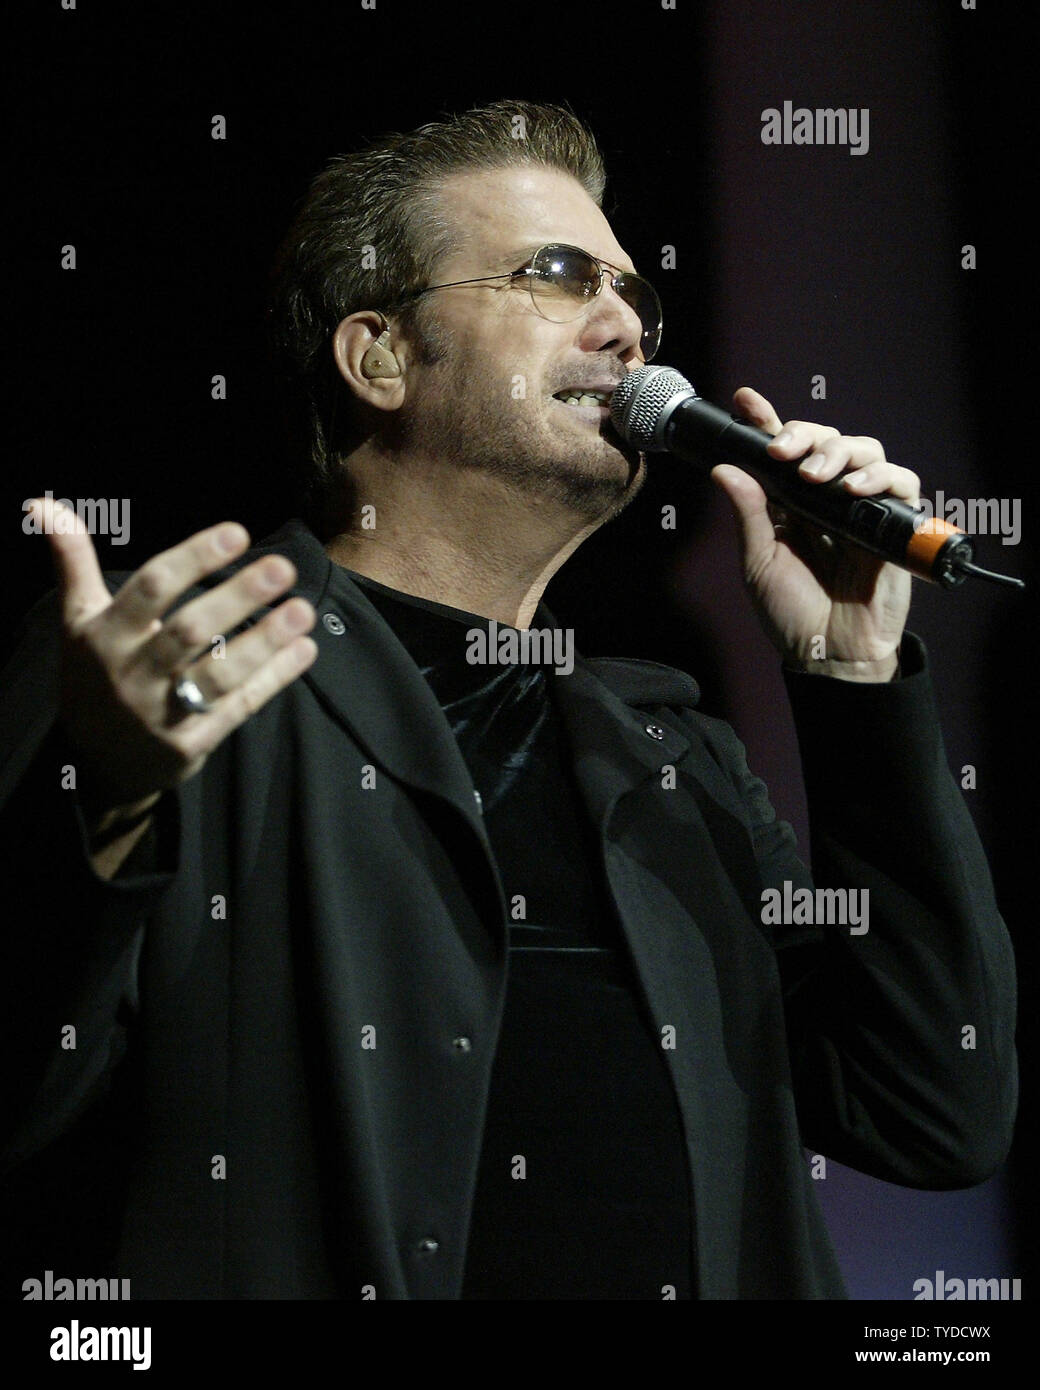 Willy Chirino performs in concert at the American Airlines Arena in Miami,  Florida, on October 17, 2004.  (UPI Photo/Michael Bush) Stock Photo